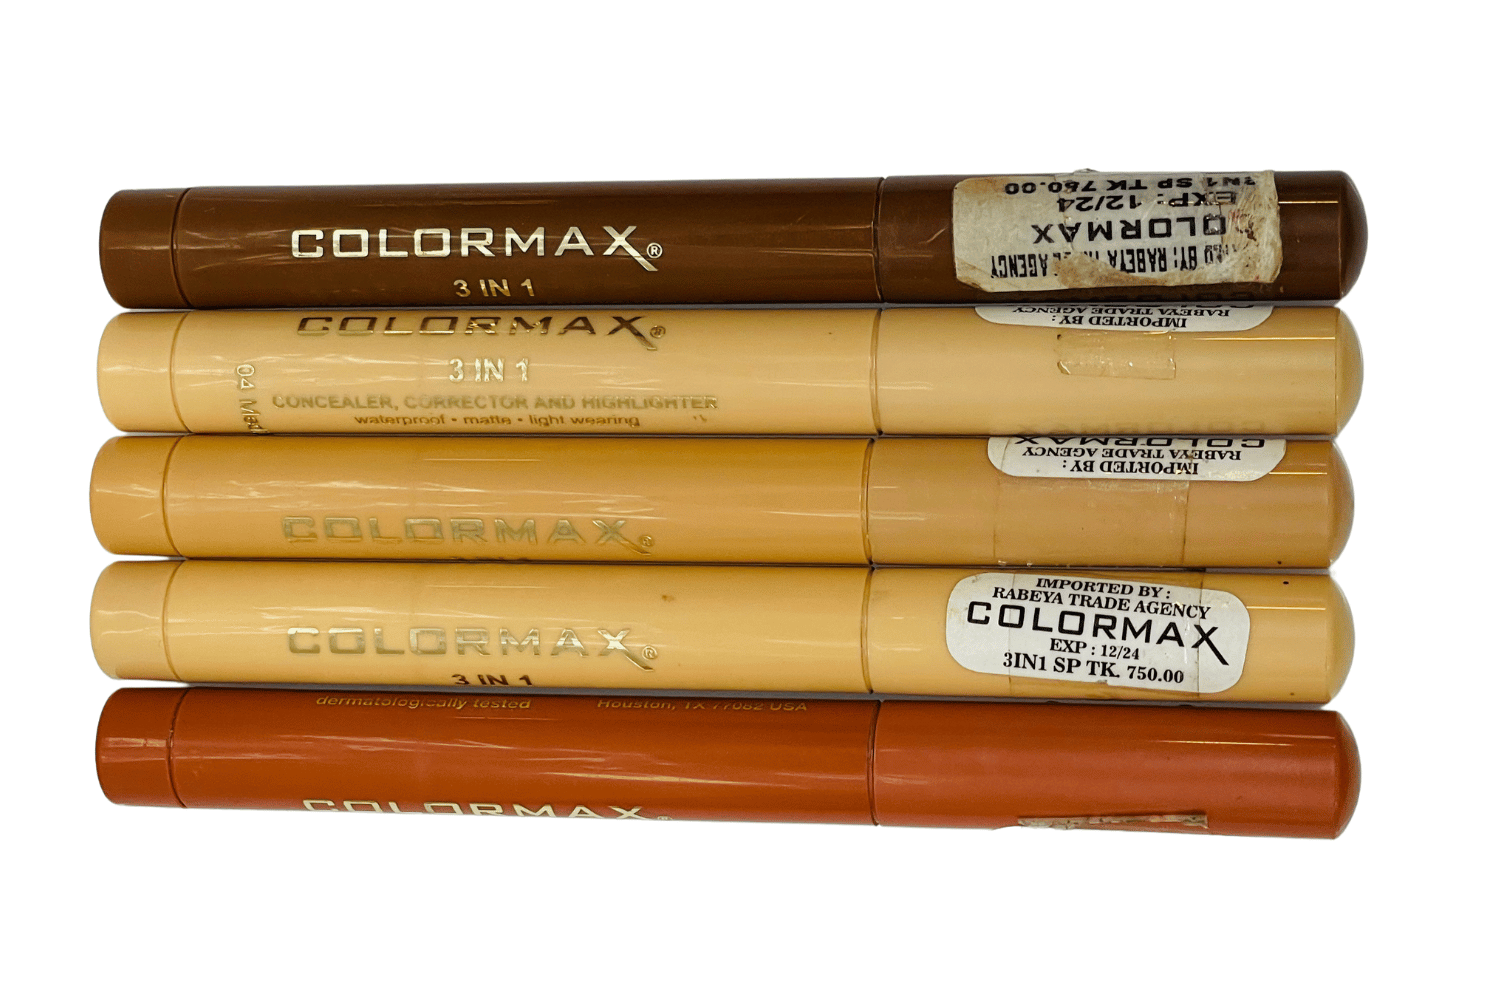 Colormax 3in1 Concealer, Corrector & Highlighter